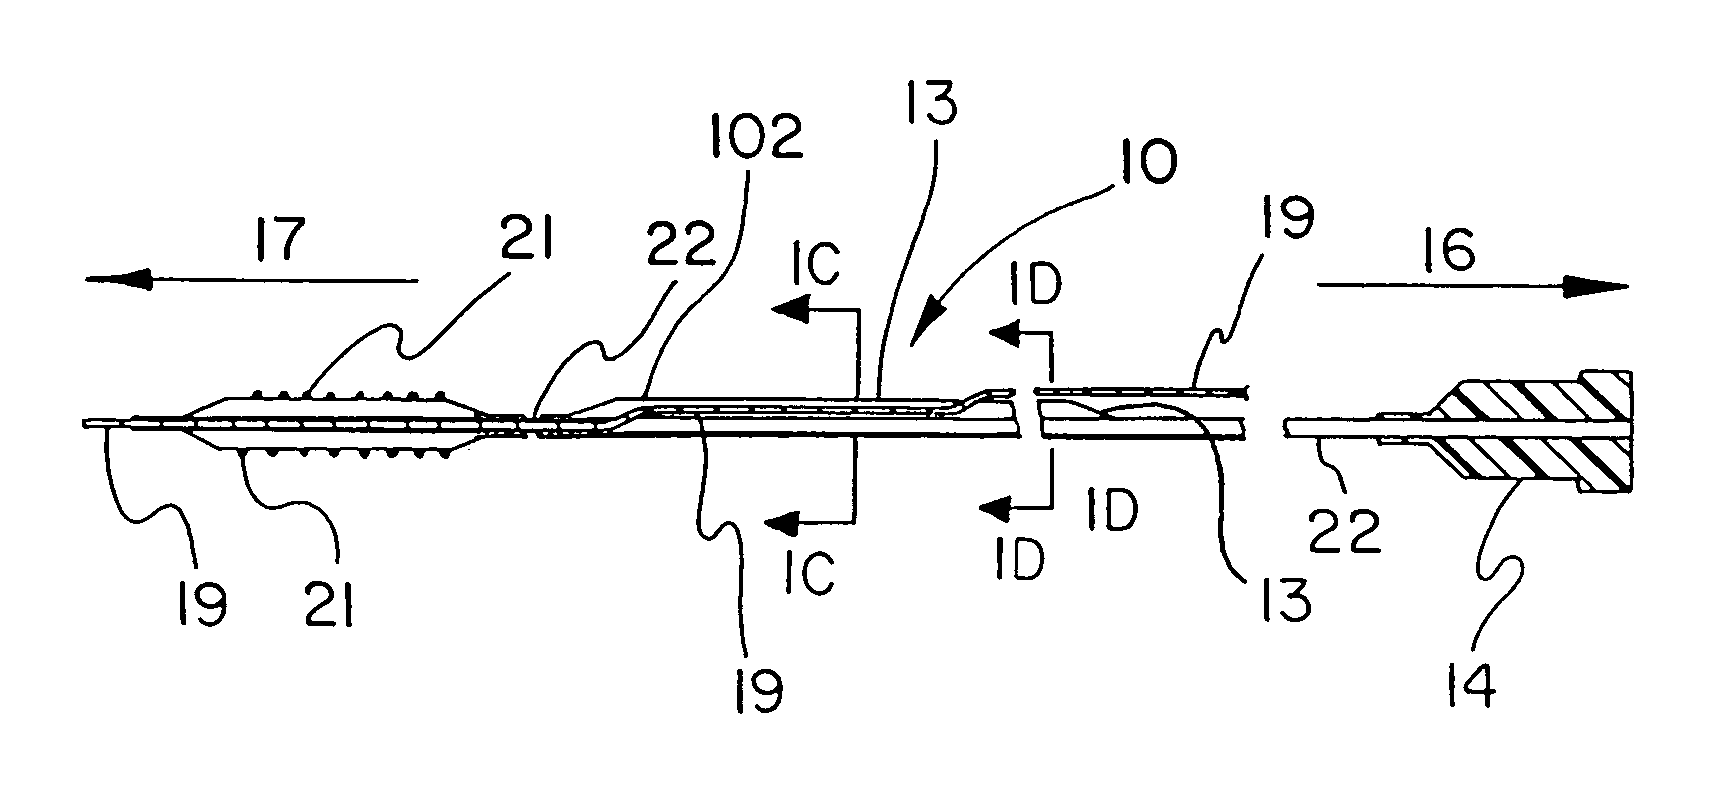 Puncturing tool for puncturing catheter shafts